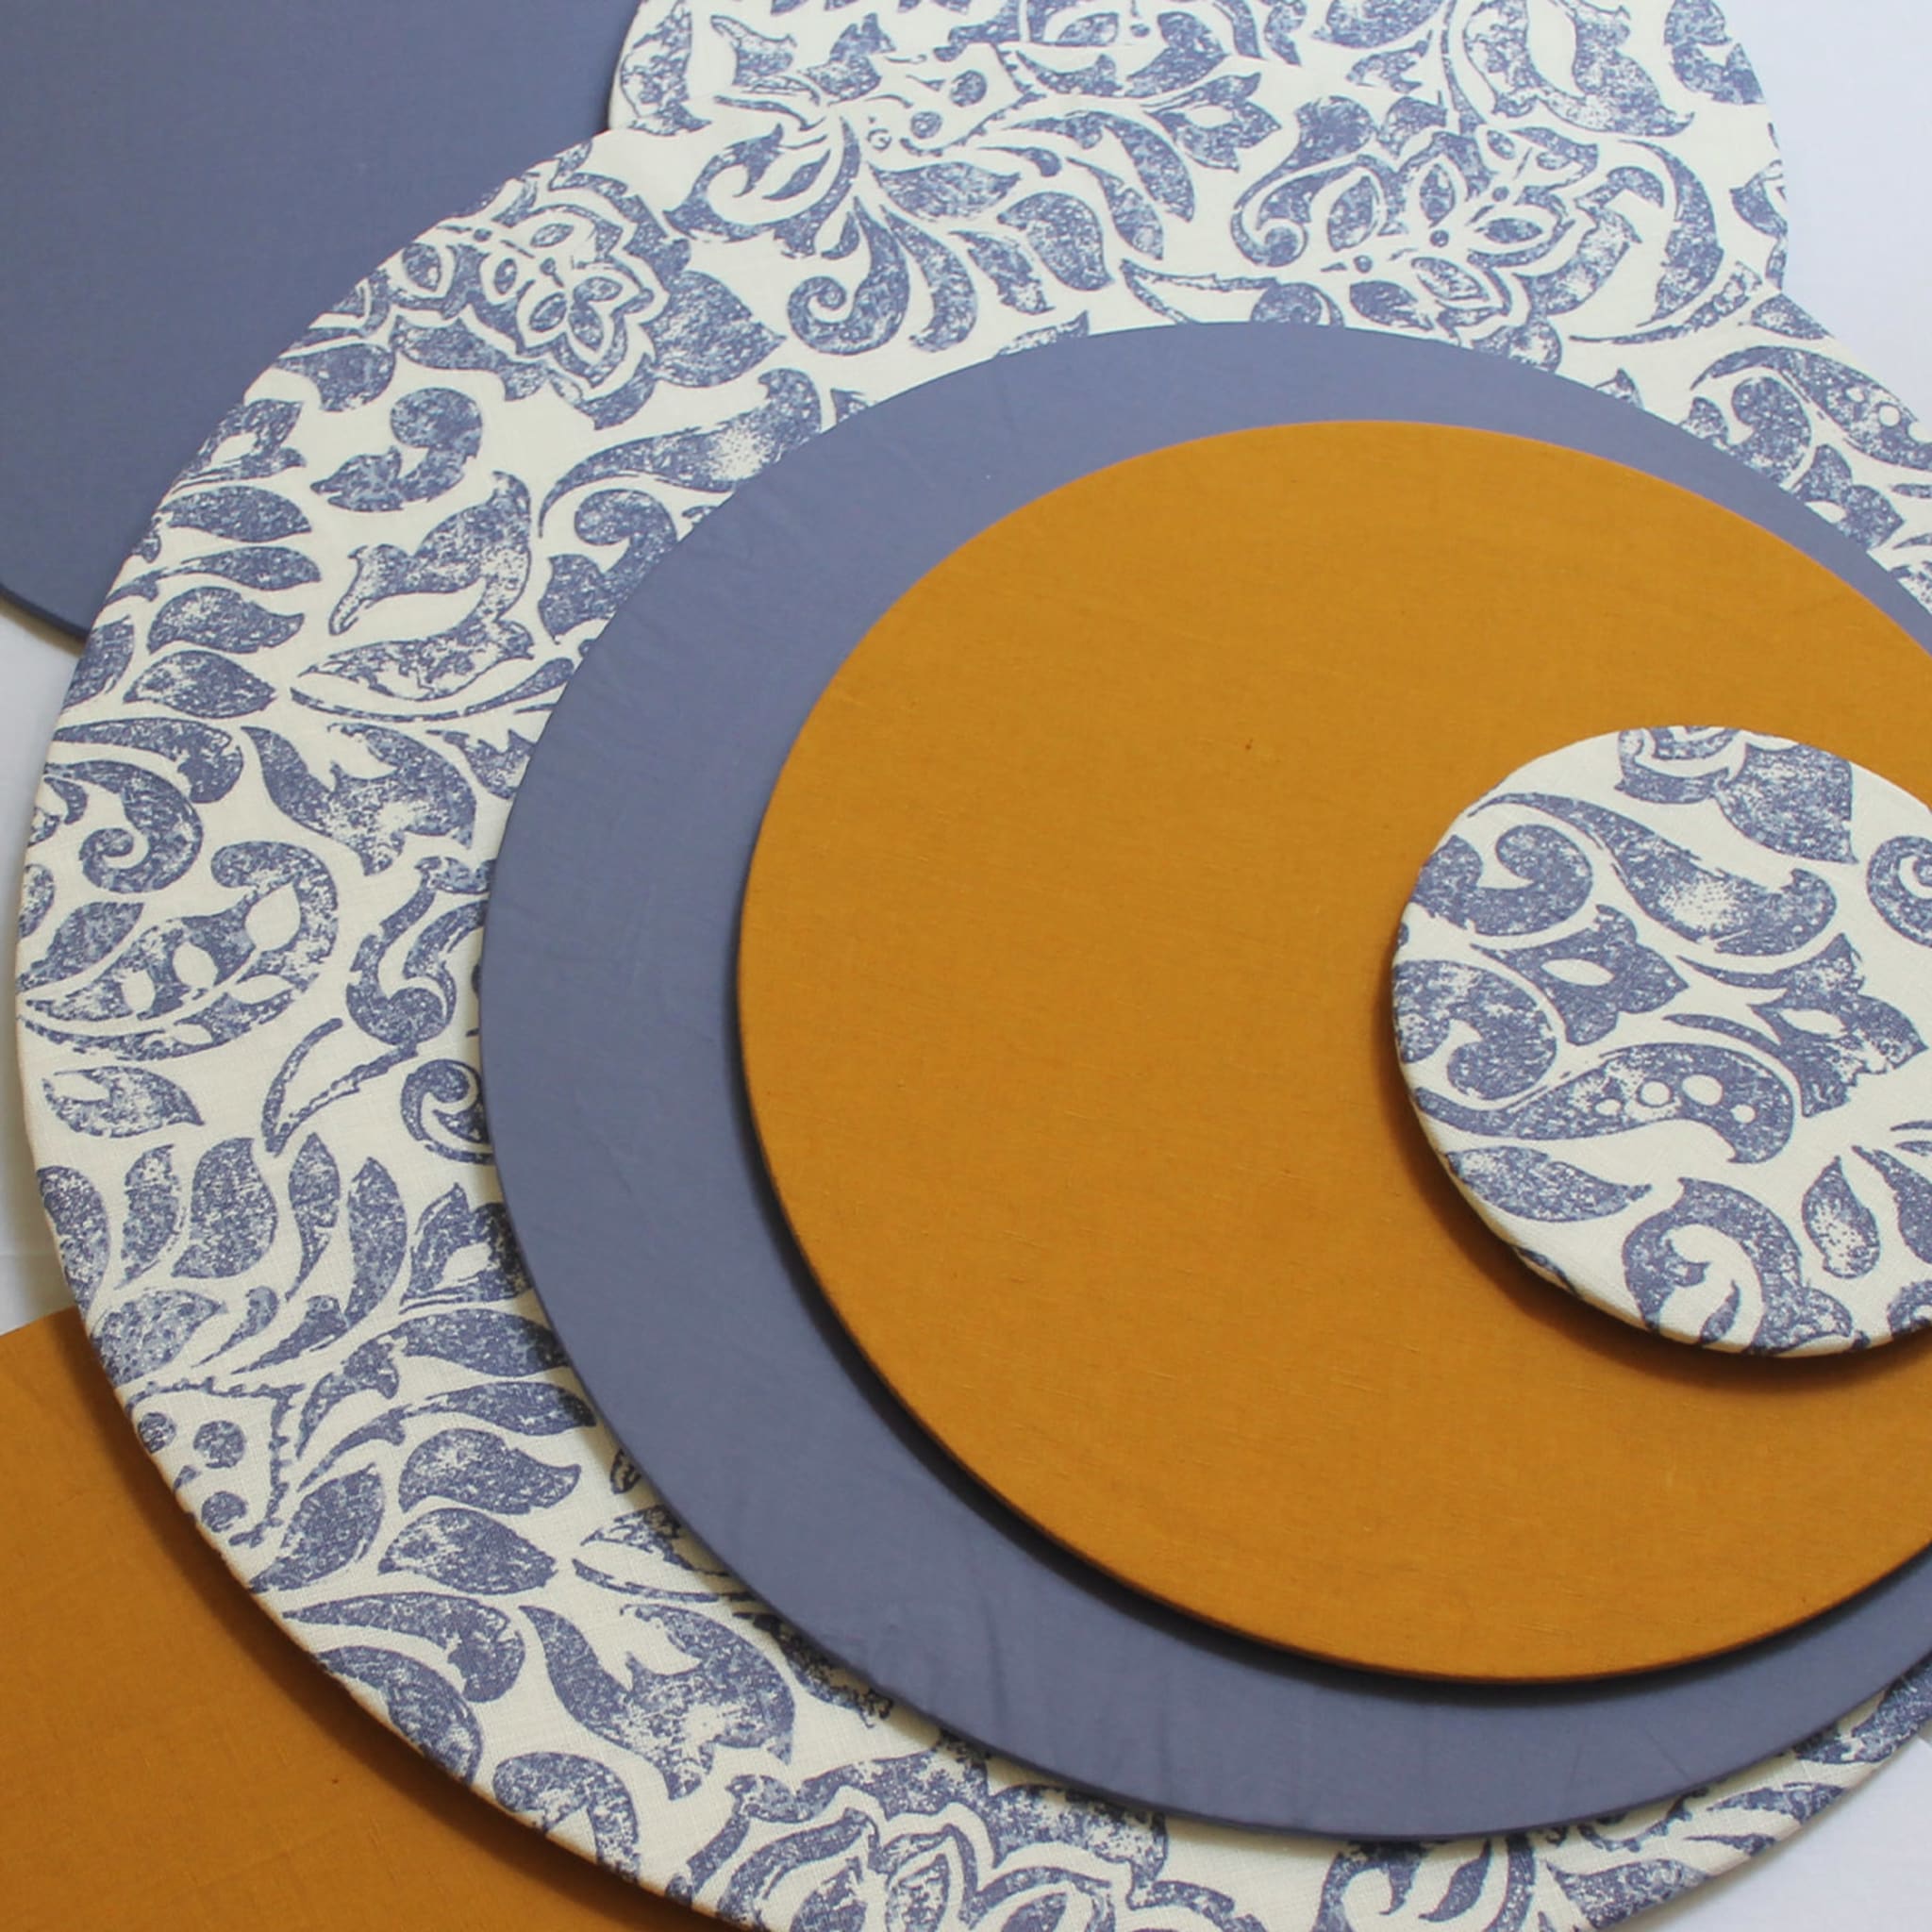 Cuffietta Large Round Periwinkle Placemat - Alternative view 1